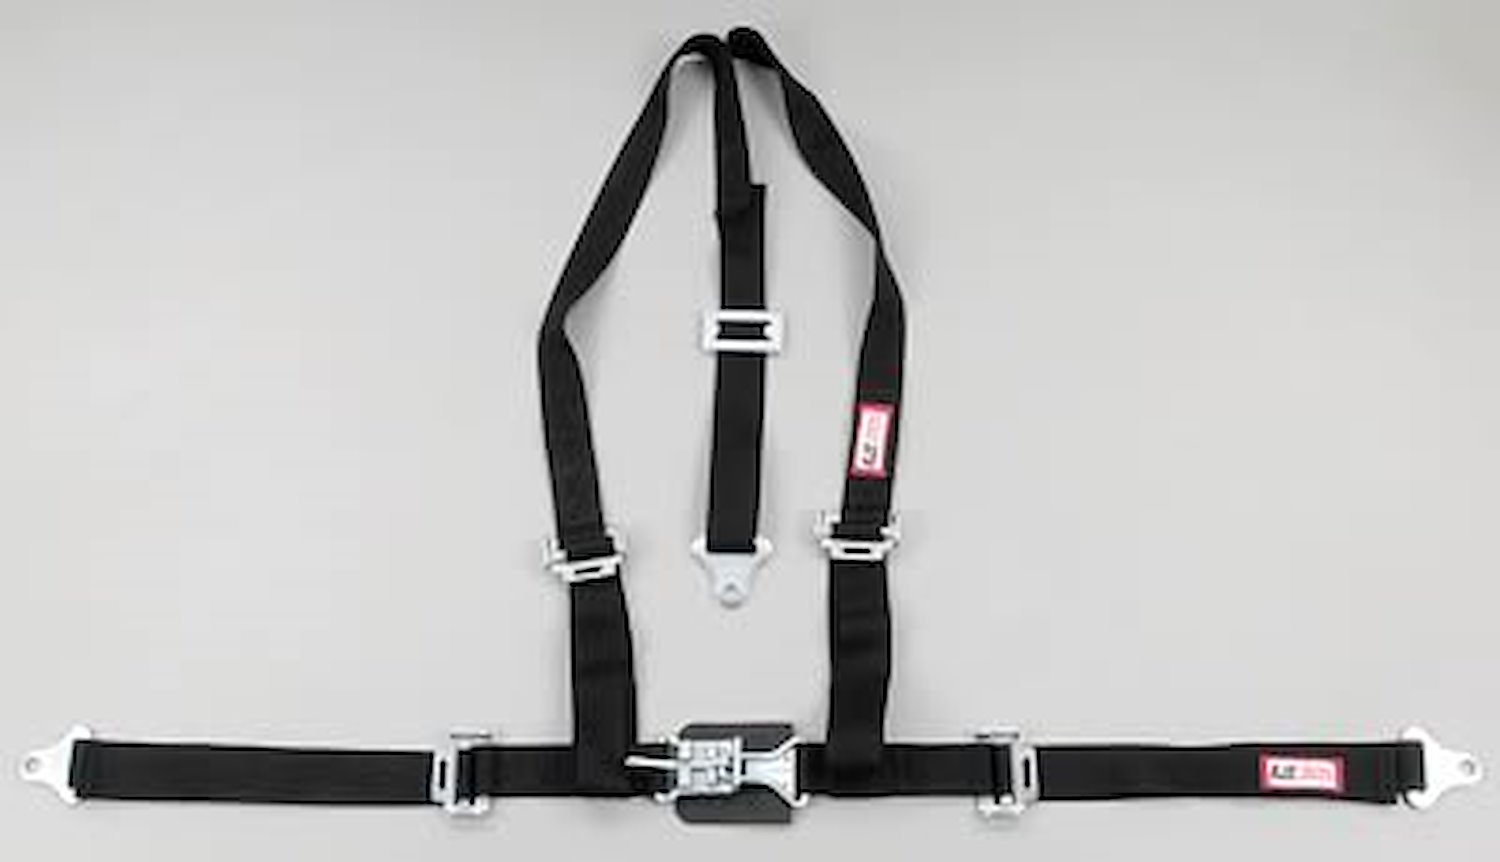 NON-SFI L&L HARNESS 3 PULL UP Lap Belt w/adjuster 2 S.H. V ROLL BAR Mount ALL SNAP ENDS GRAY